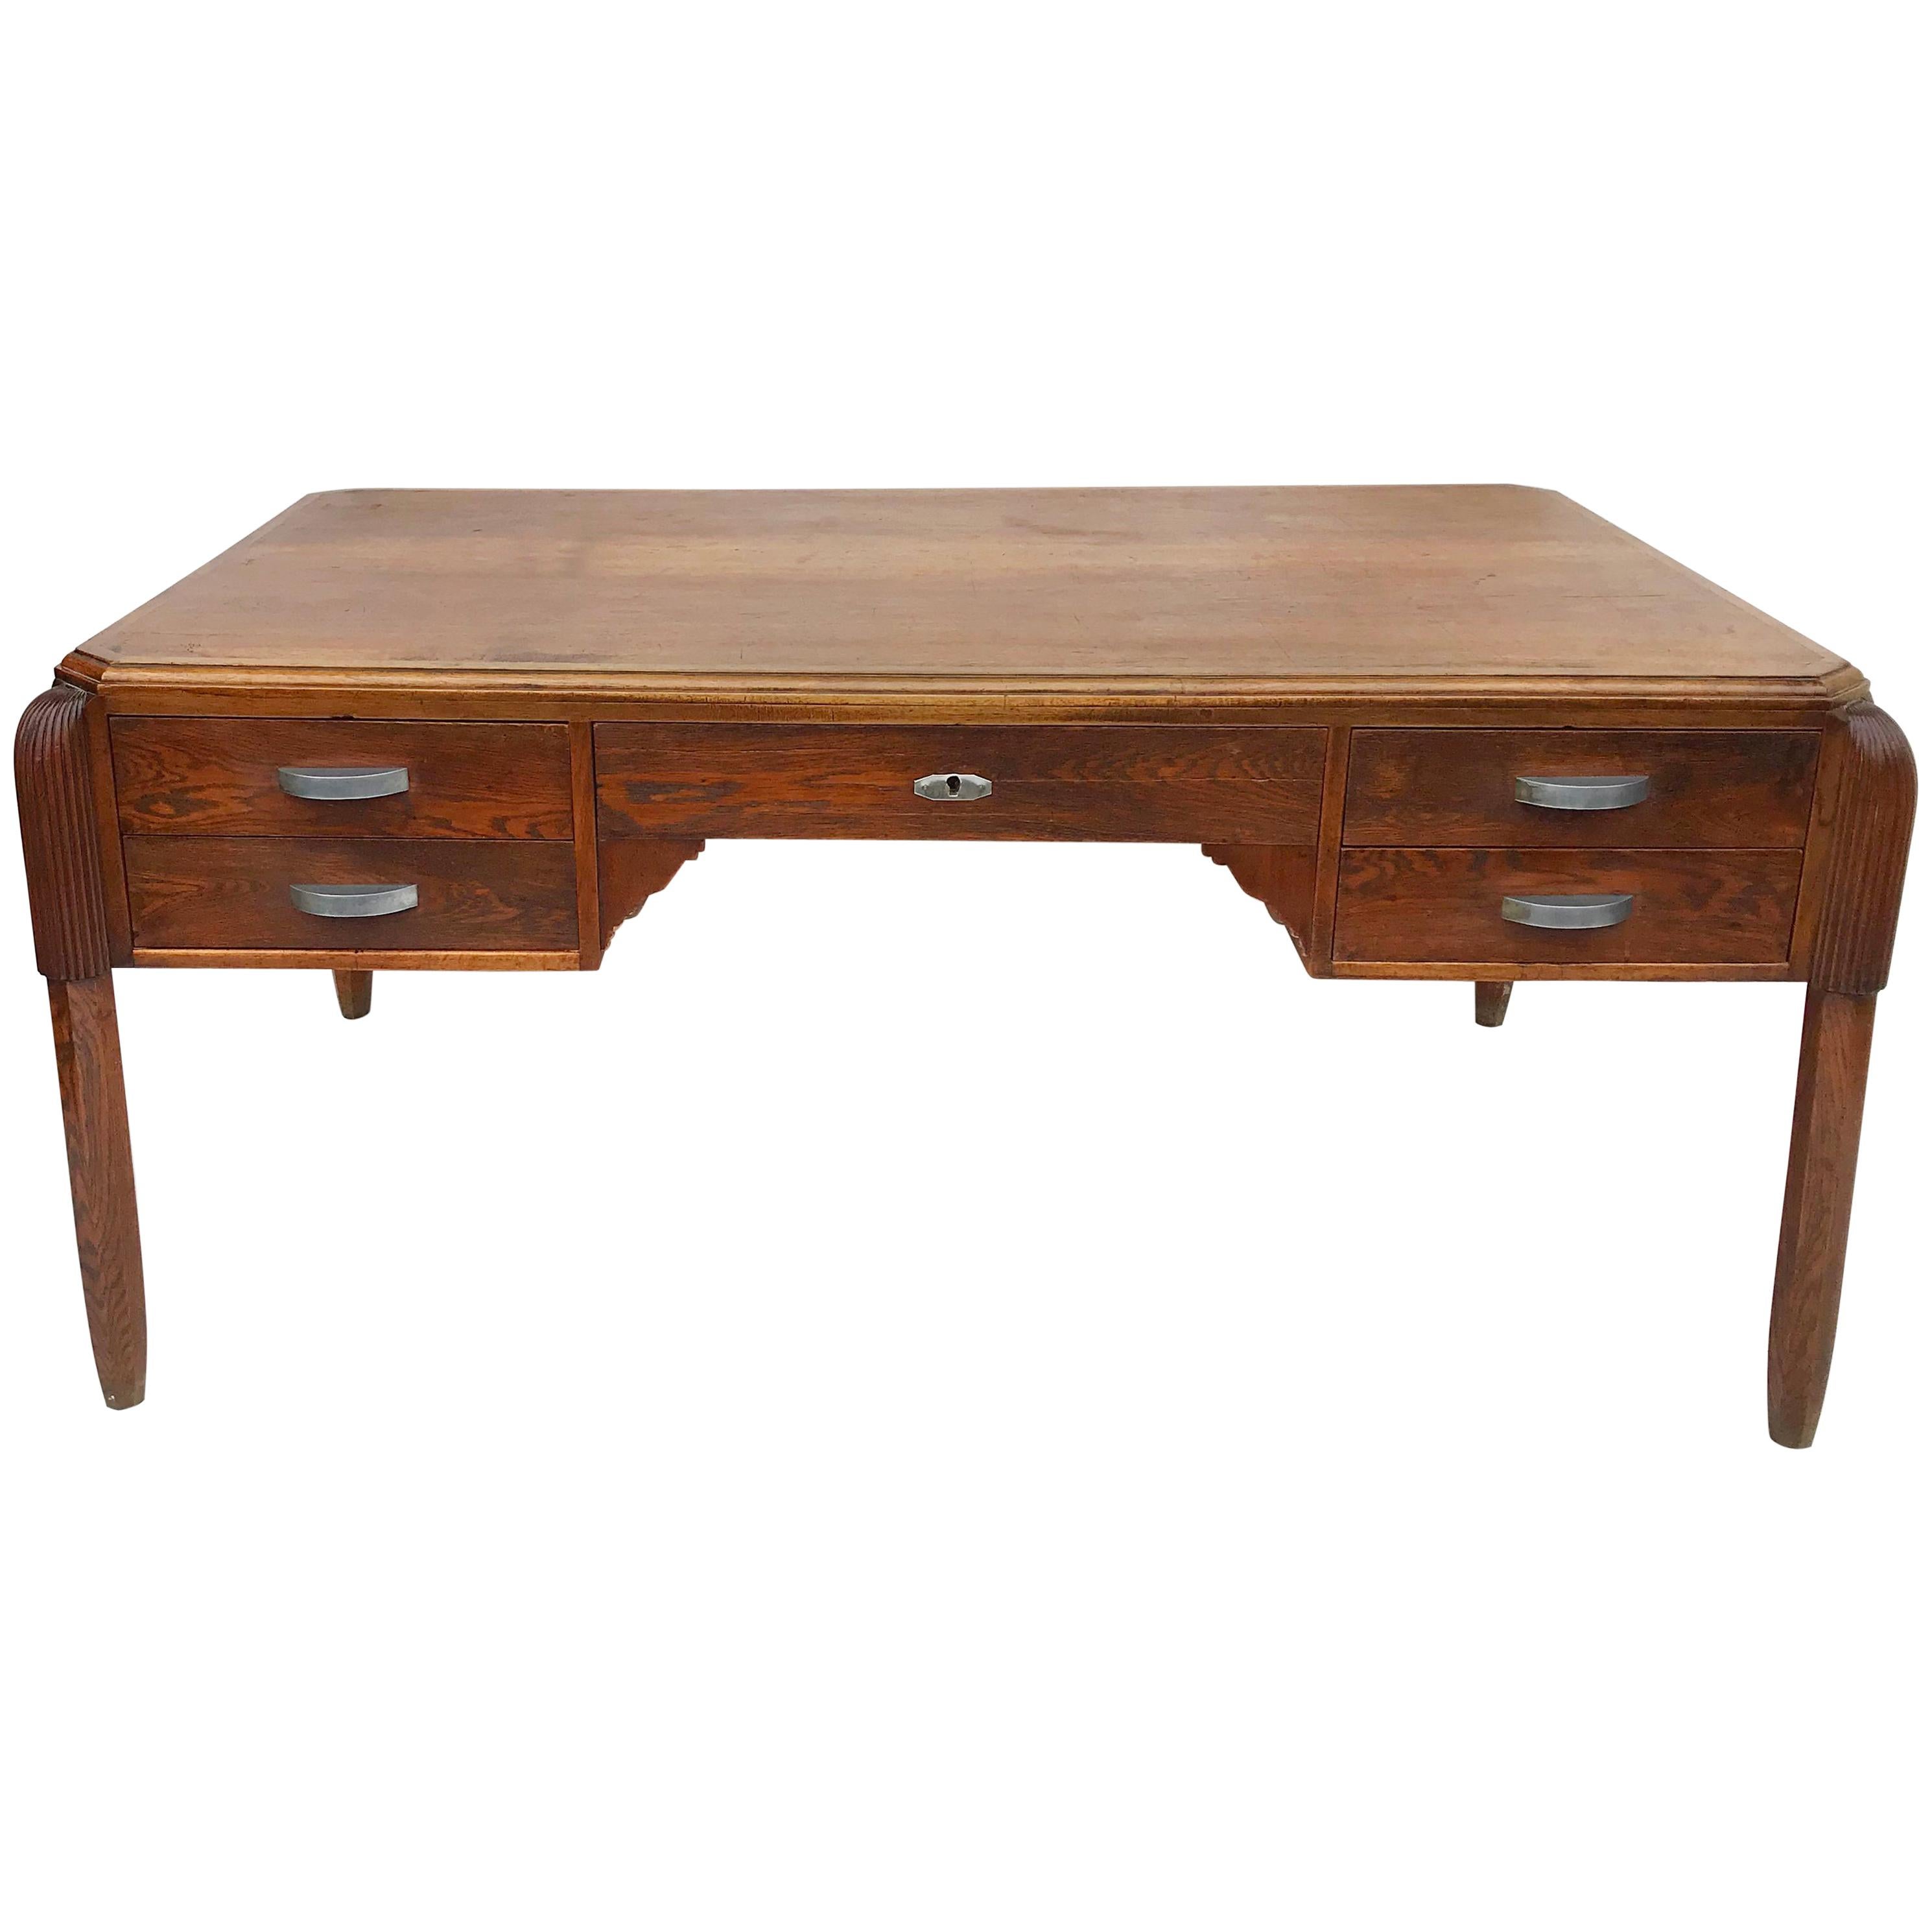 Attributed to Paul Follot, Large Art Deco Desk, 1920s